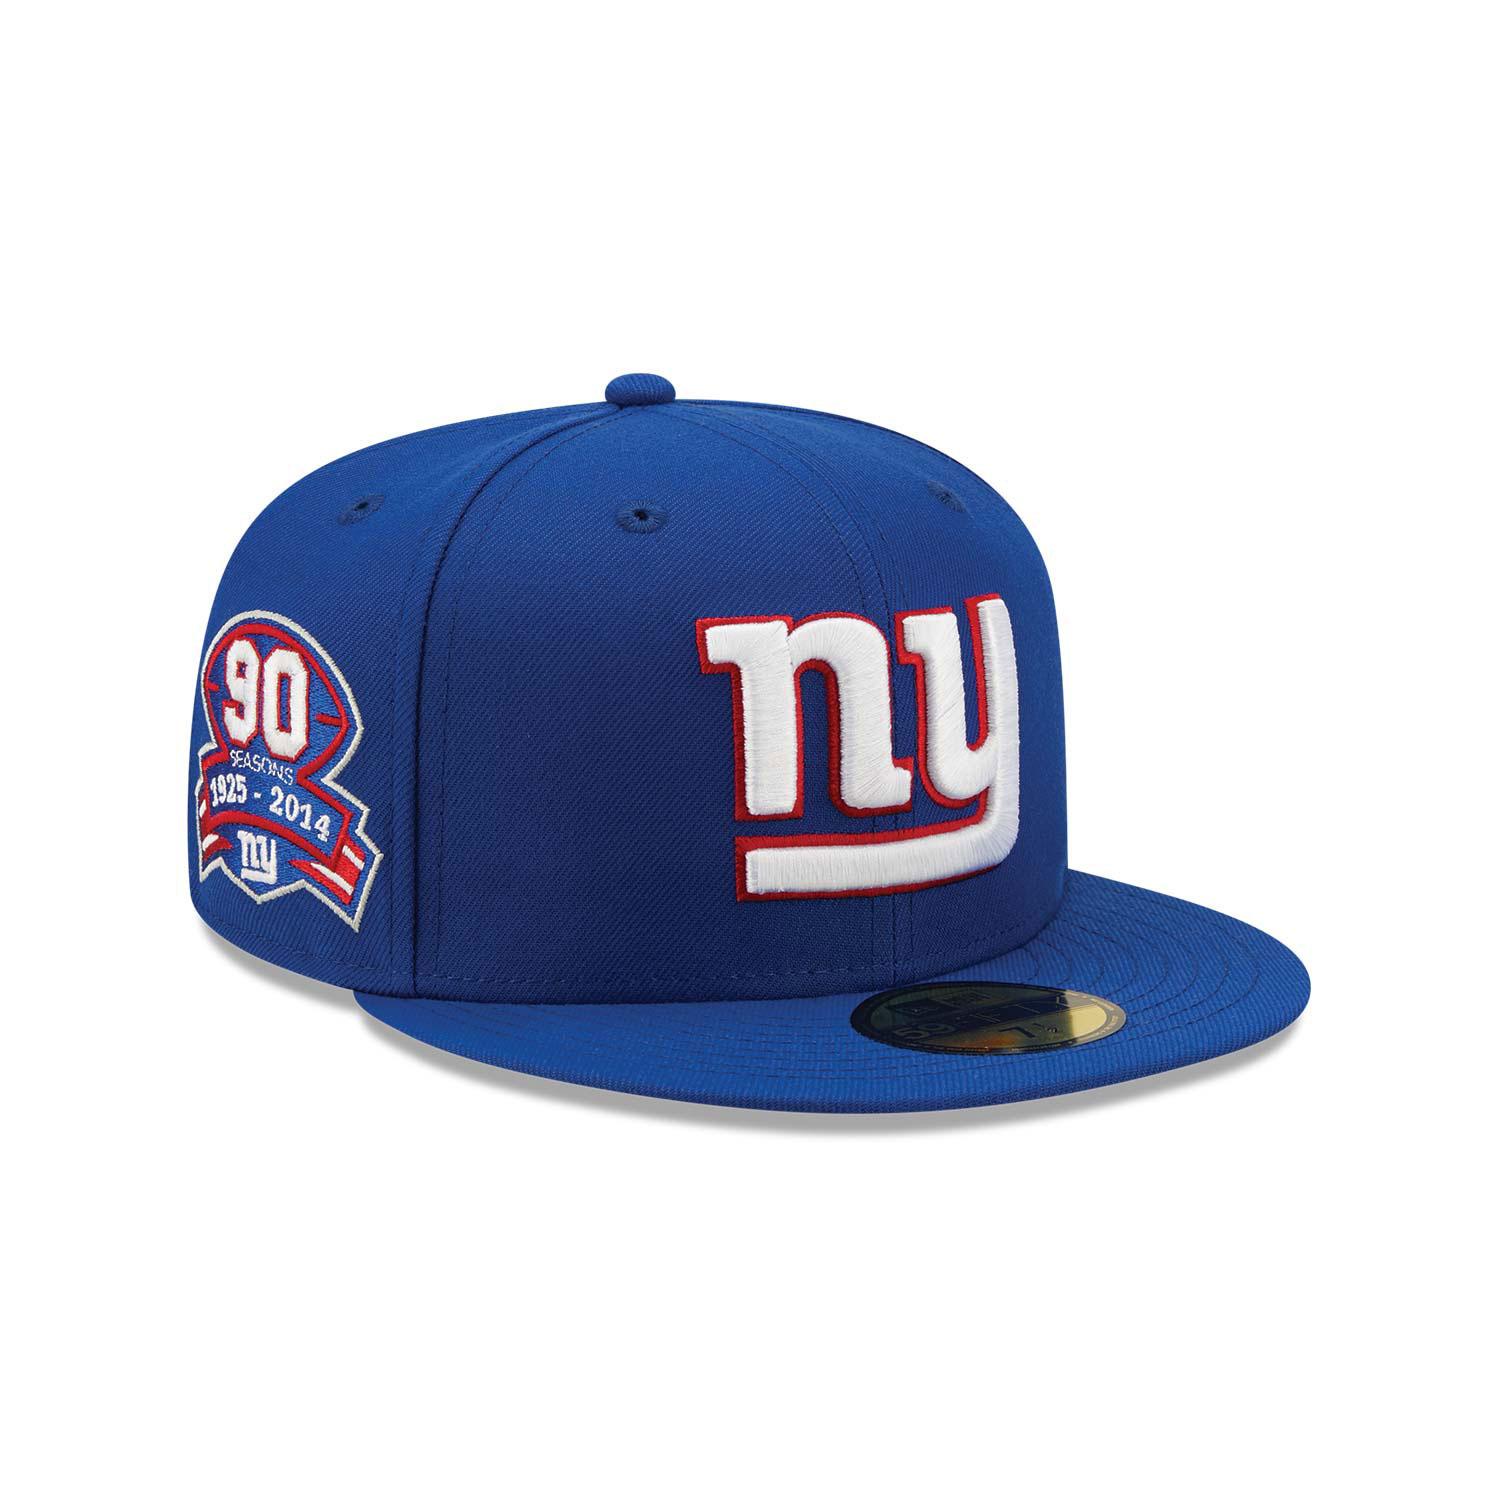 Official New Era New York Giants Blue 59FIFTY Fitted Cap B8532_B90